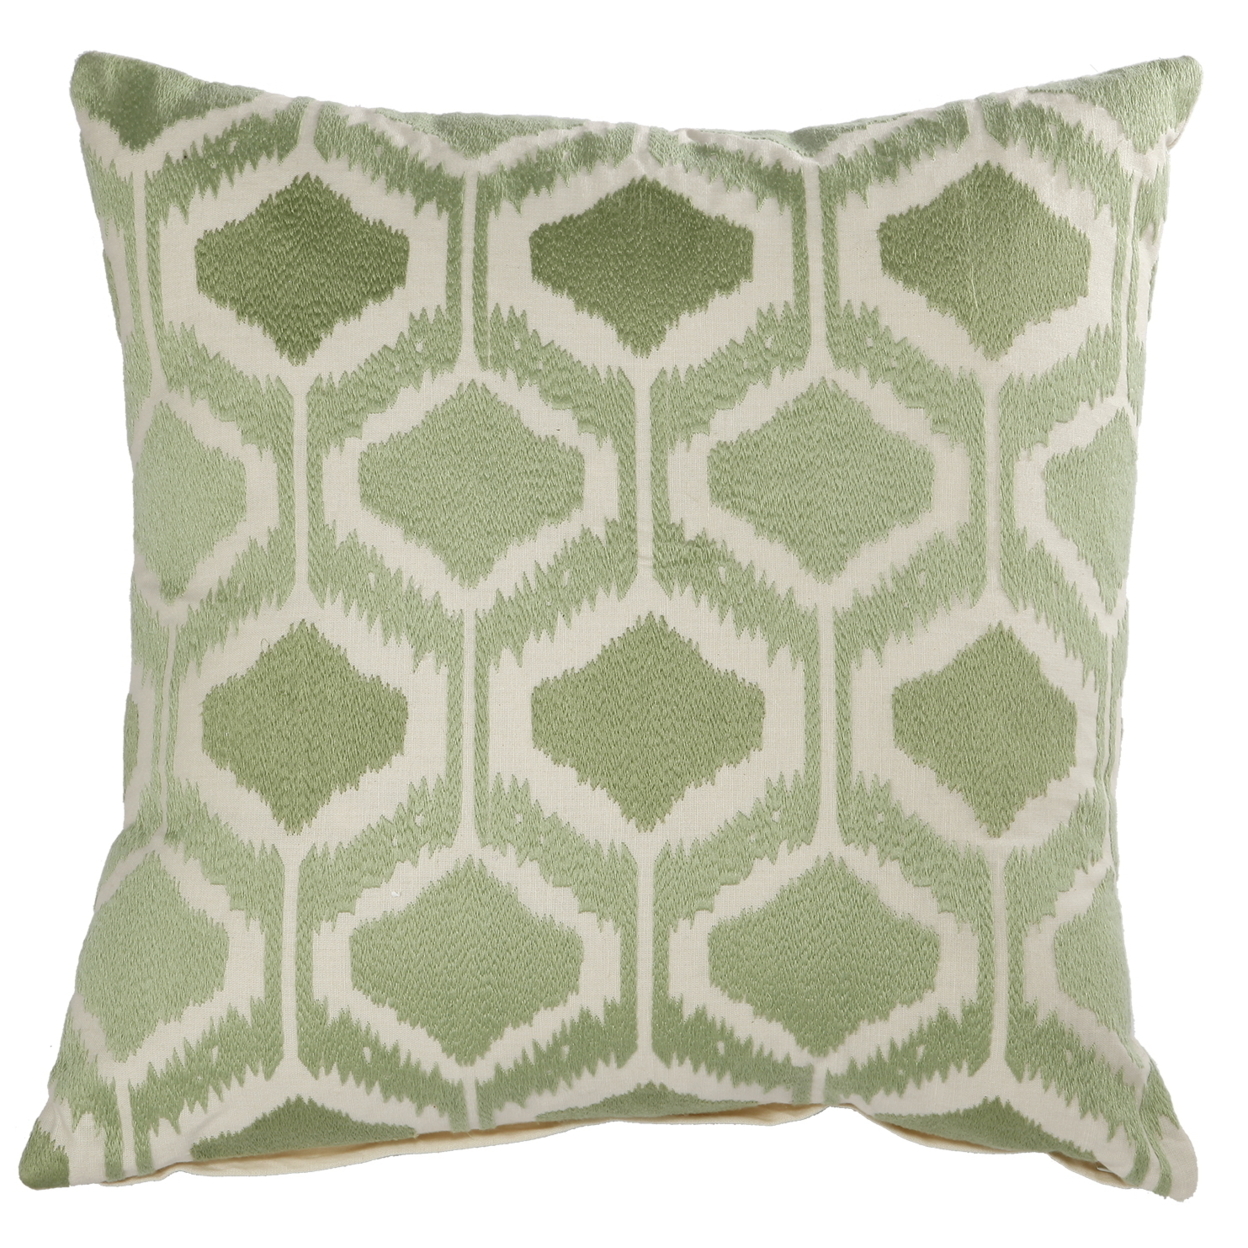 20 X 18 Inch Cotton Pillow With Fretwork Embroidery, Set Of 2, Green And White- Saltoro Sherpi